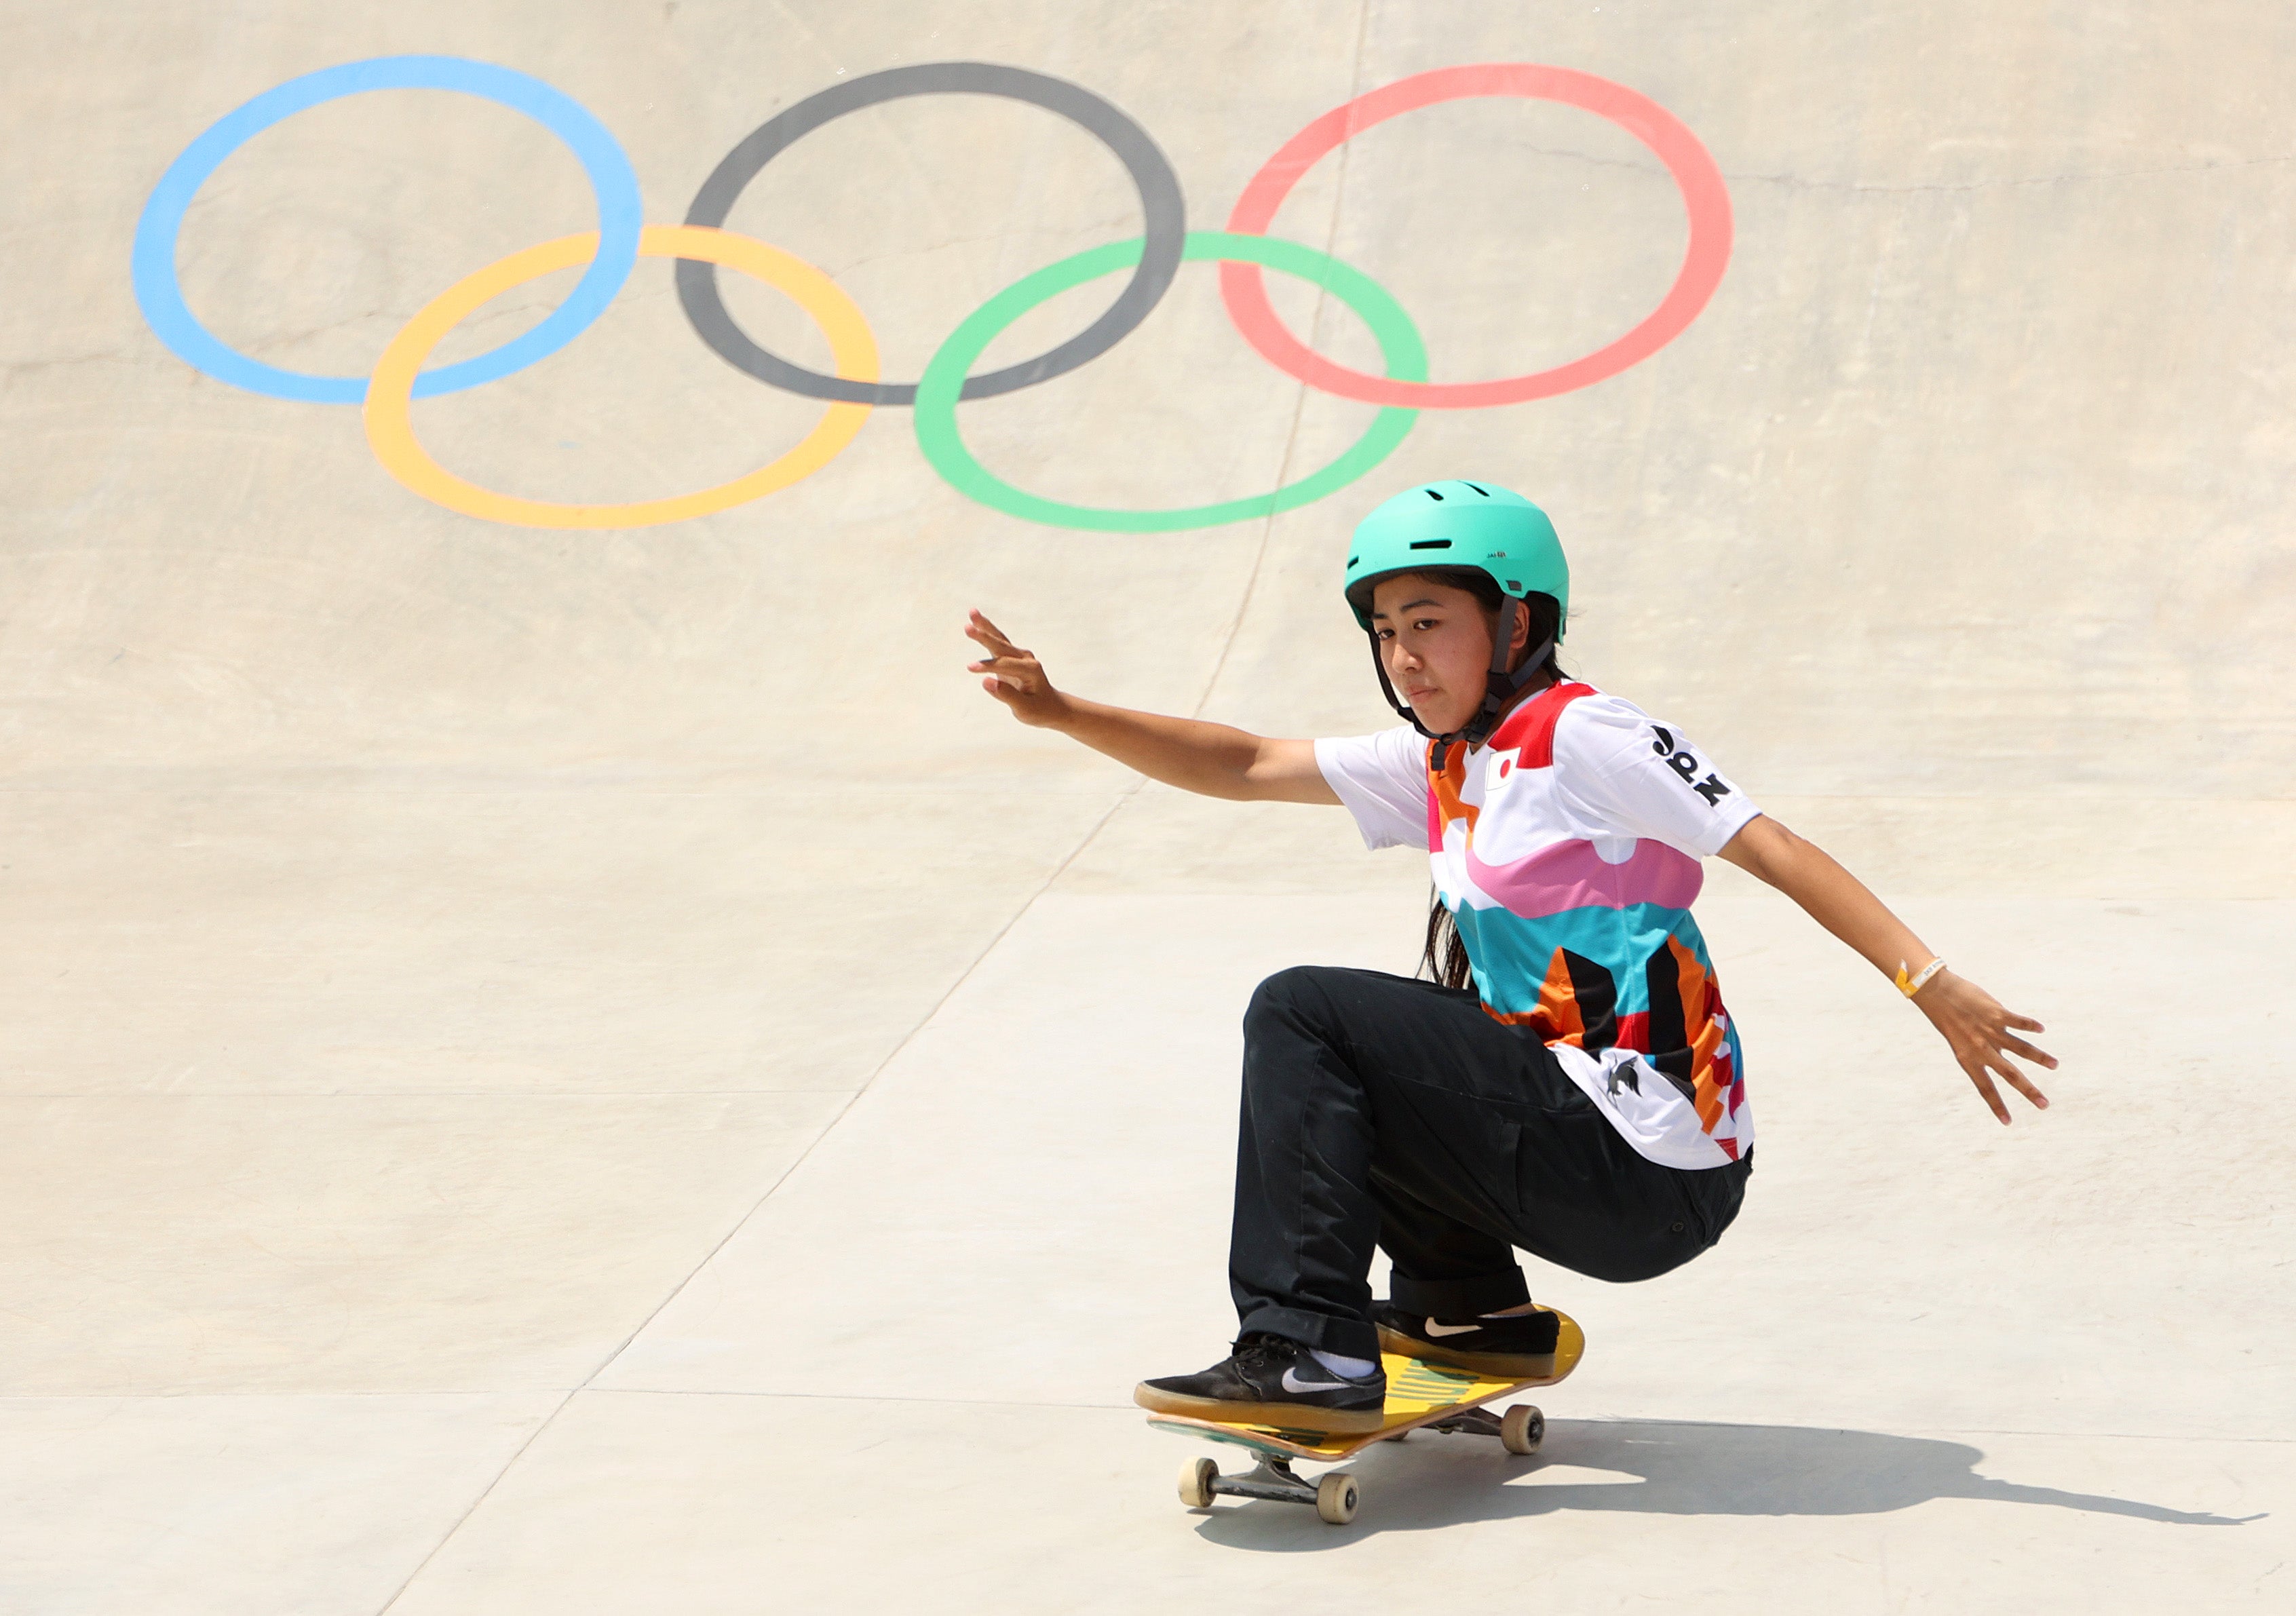 Olympics Skateboarding Schedule: When Will Sky Brown Perform? - Skate